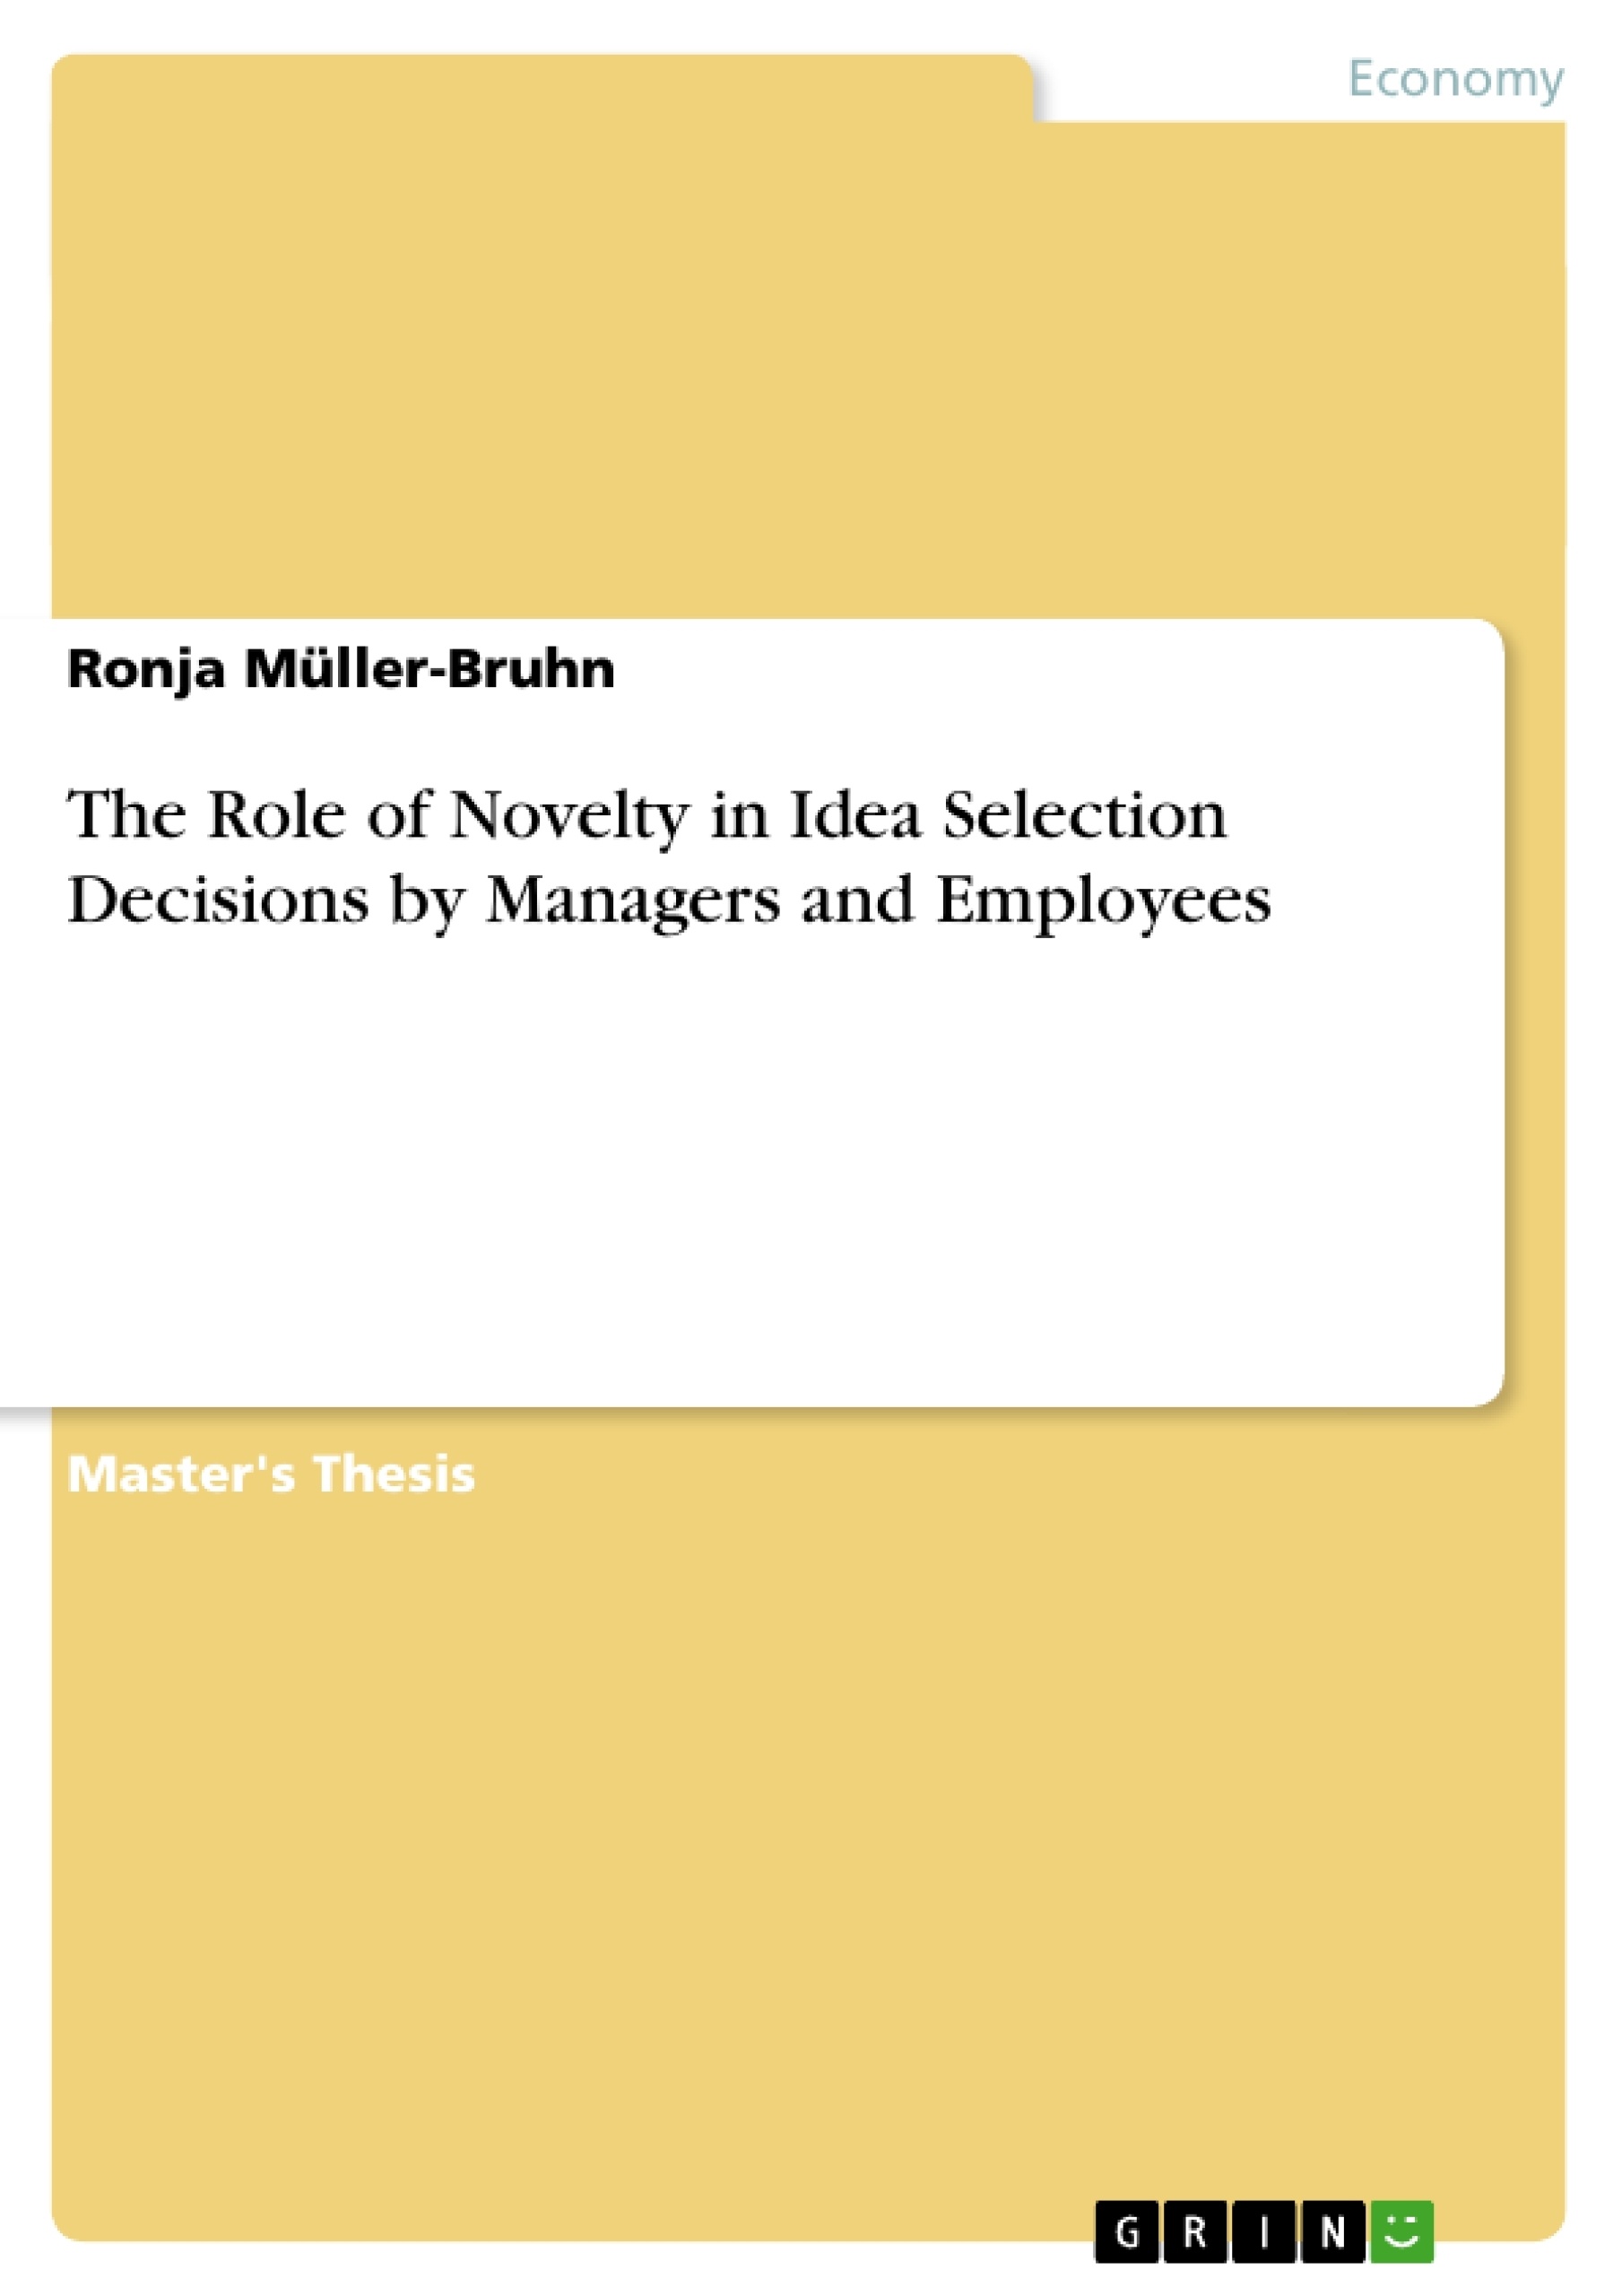 Title: The Role of Novelty in Idea Selection Decisions by Managers and Employees